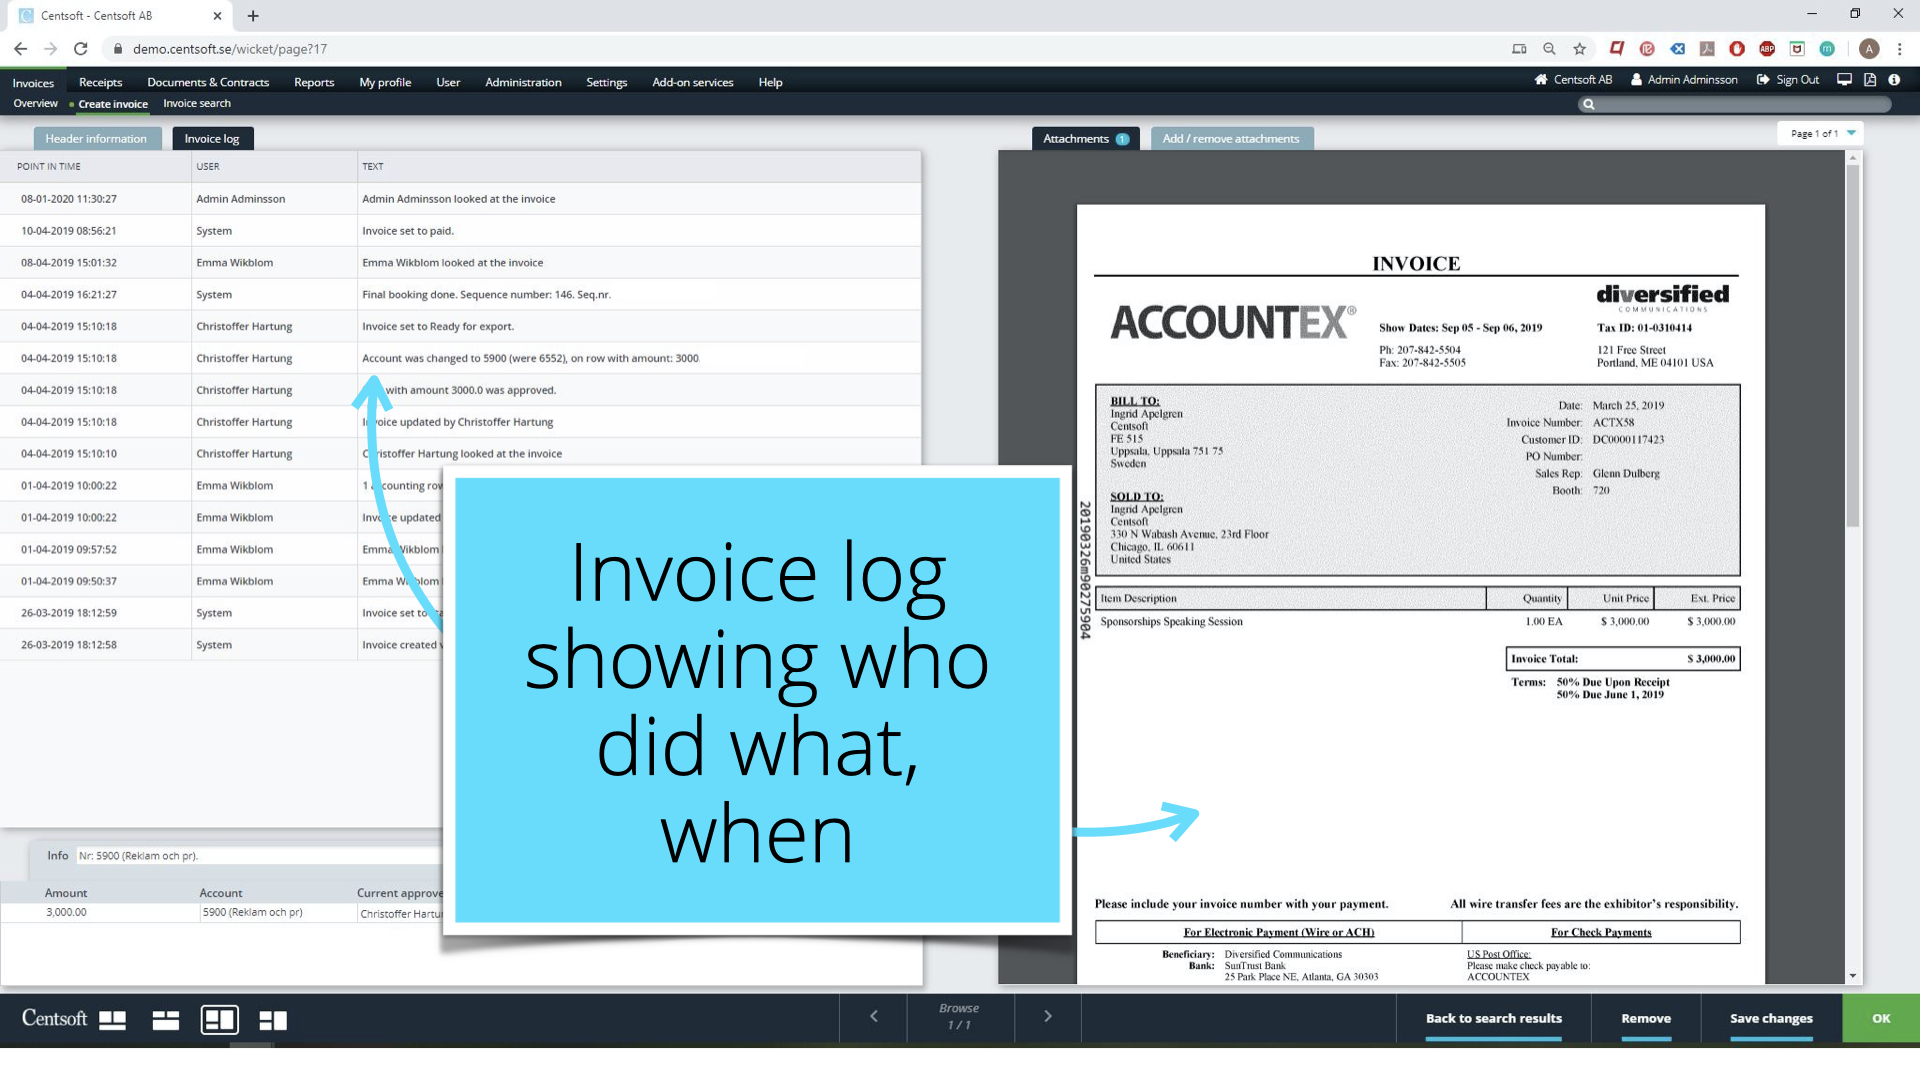 Invoice Archive with Audit - current and paid invoices are stored in the cloud for reviewing and auditing. An invoice log time stamps all activity for investigations. Makes audits easier.